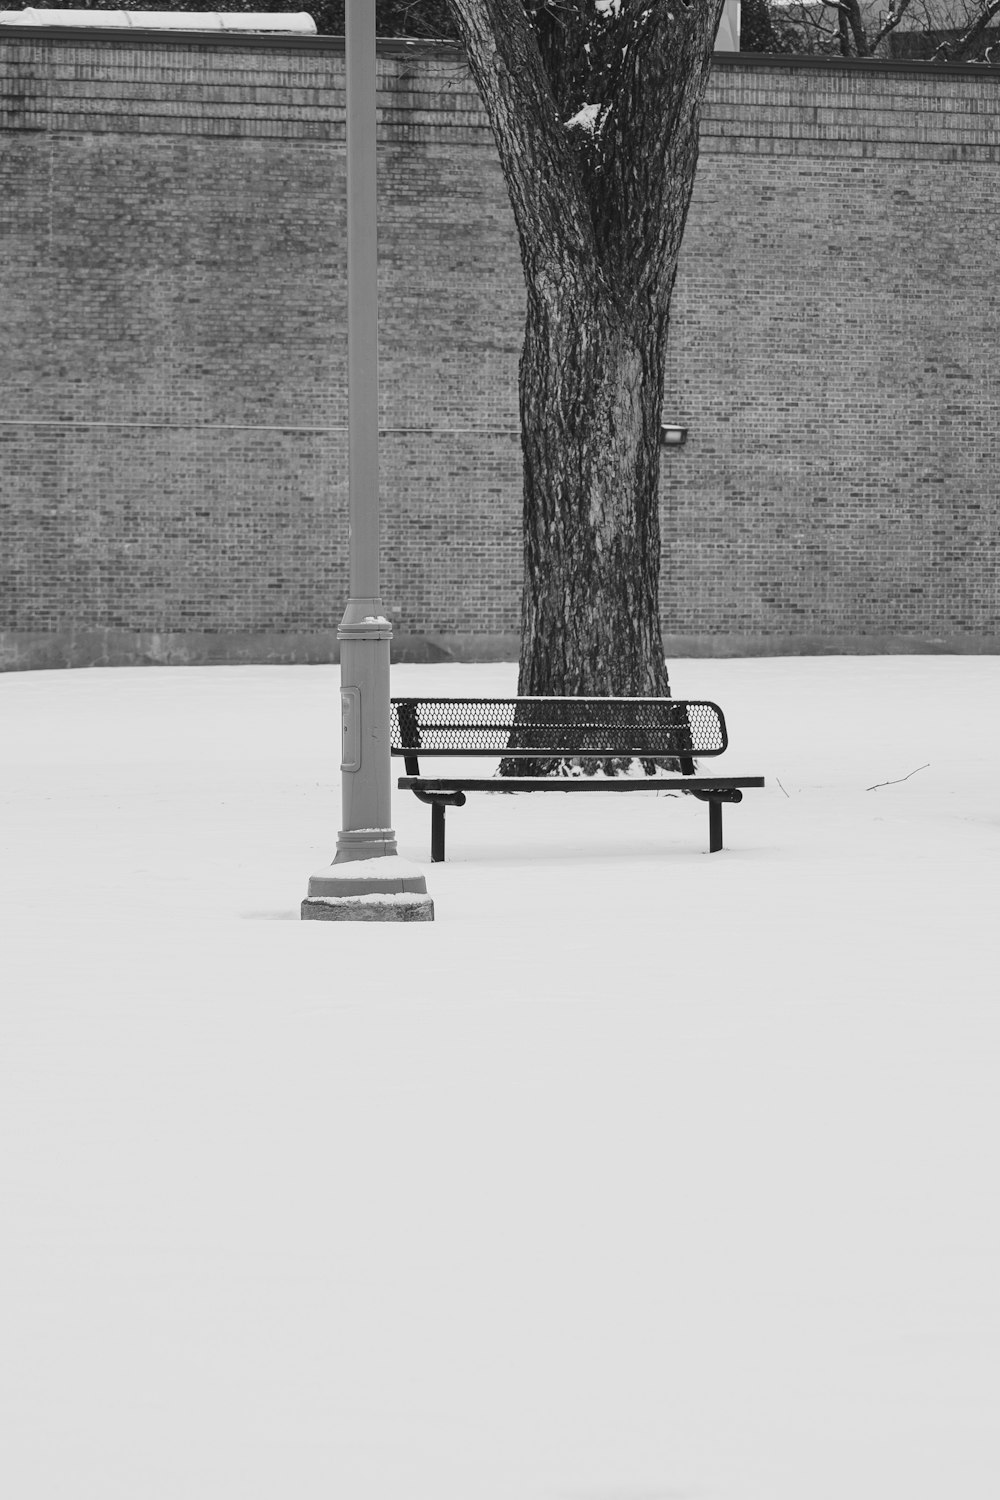 a black and white photo of a bench under a tree